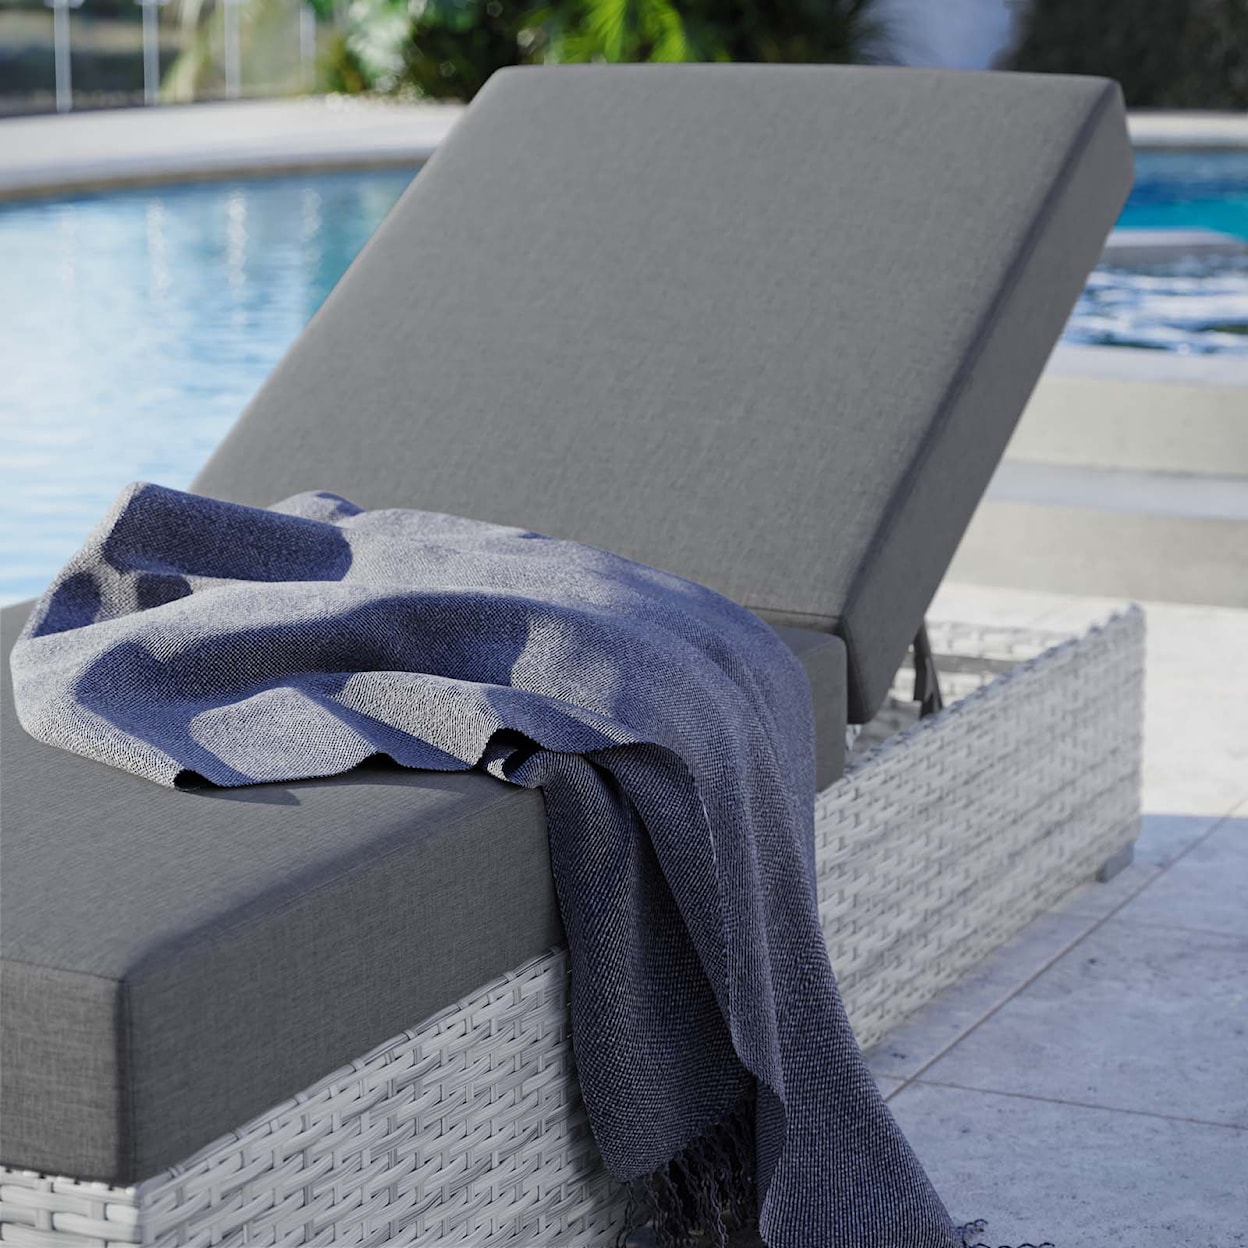 Modway Convene Outdoor Chaise